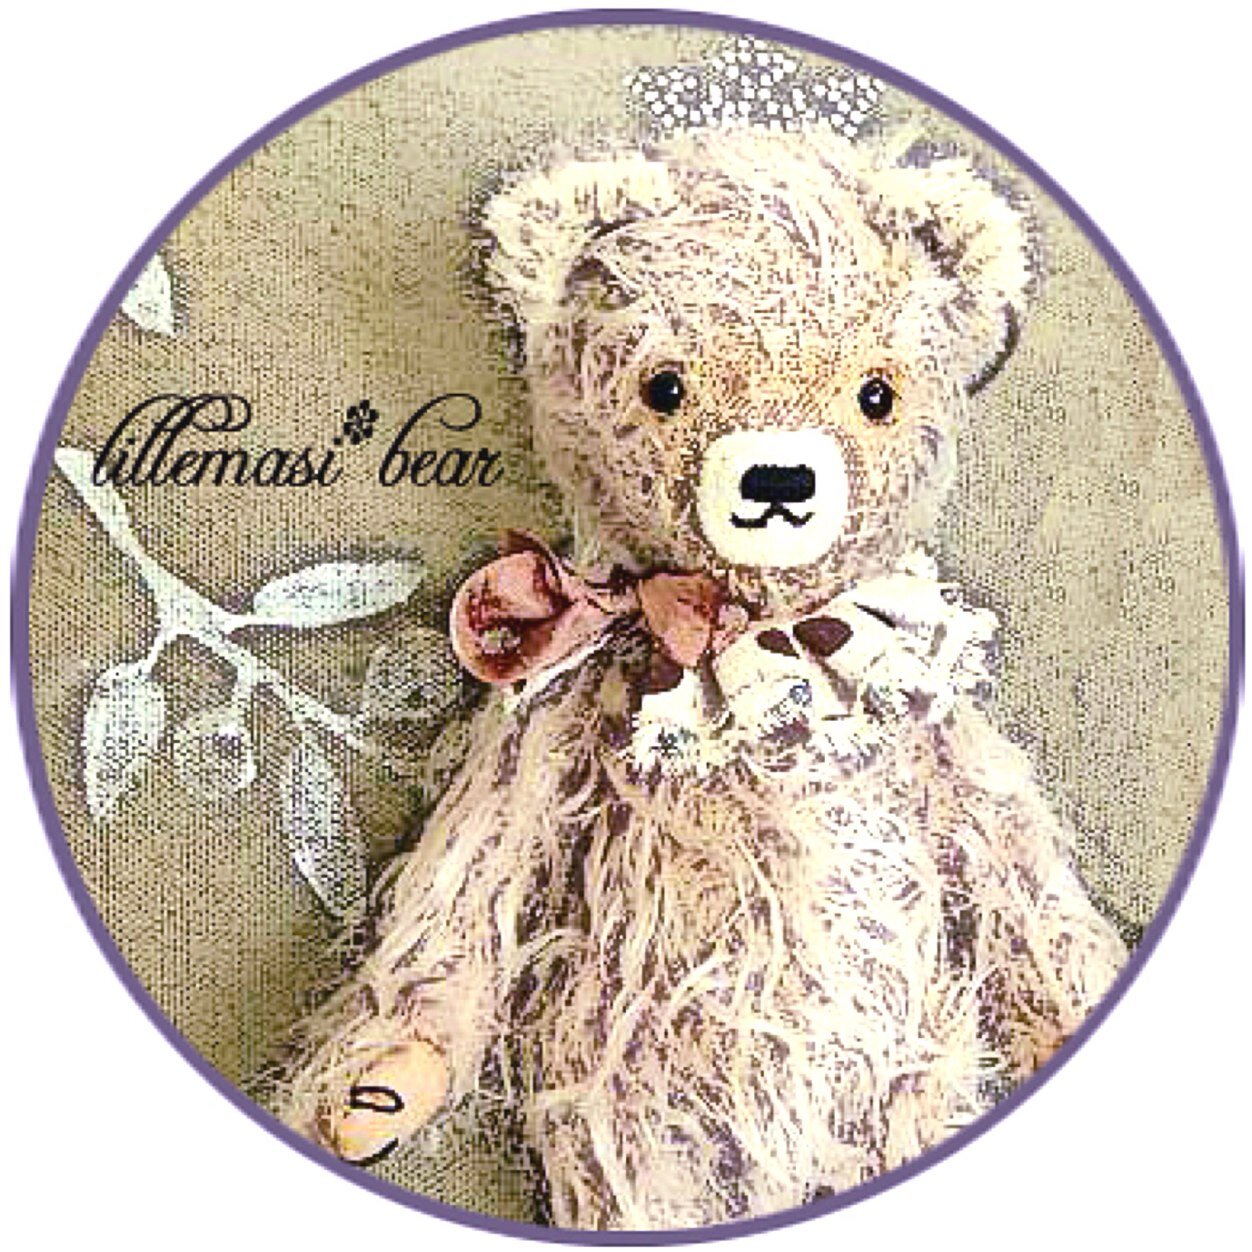 Original teddy bears for privat collectors. Art and craft makes me feel better.♡ https://t.co/VN8MCCHn3h